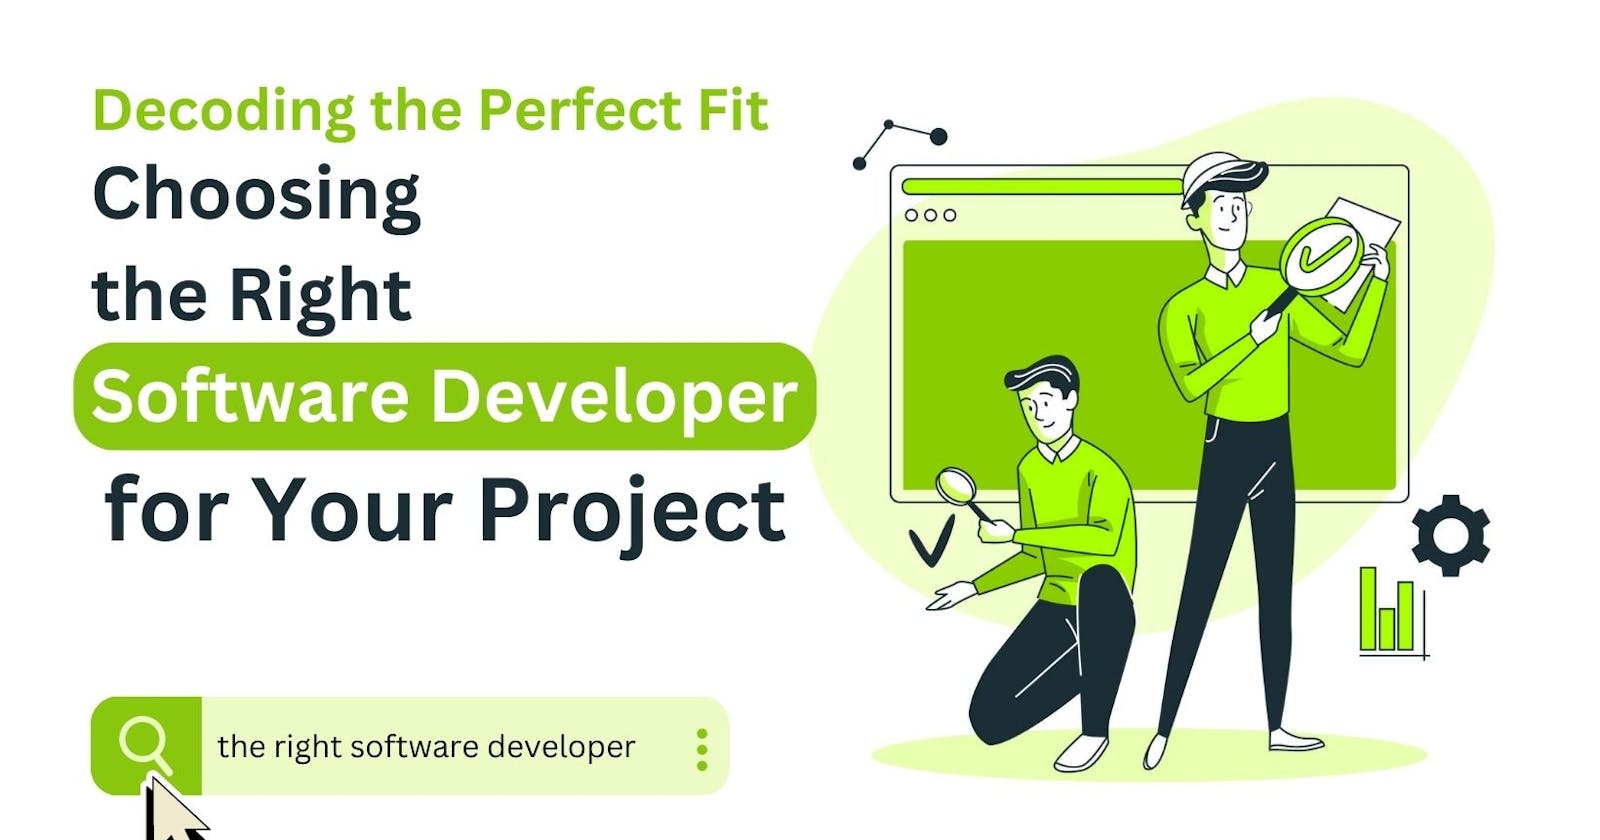 Decoding the Perfect Fit: Choosing the Right Software Developer for Your Project